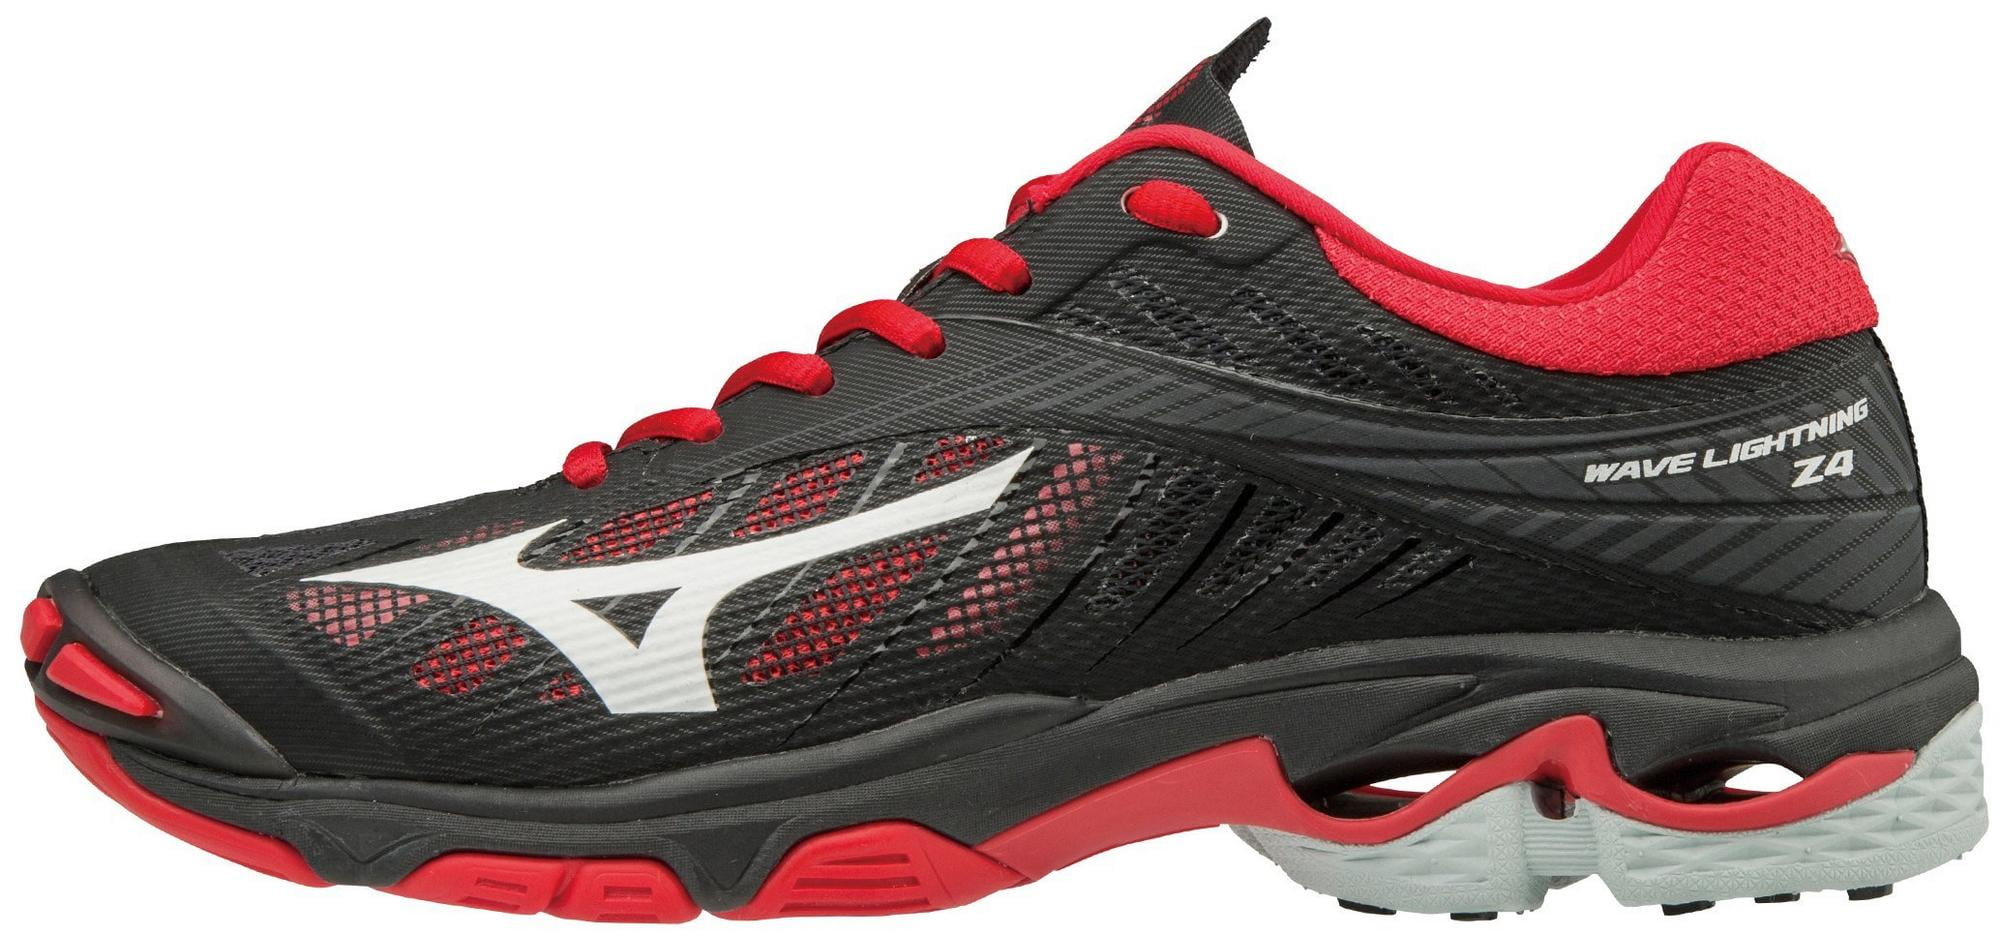 mizuno volleyball shoes black and red